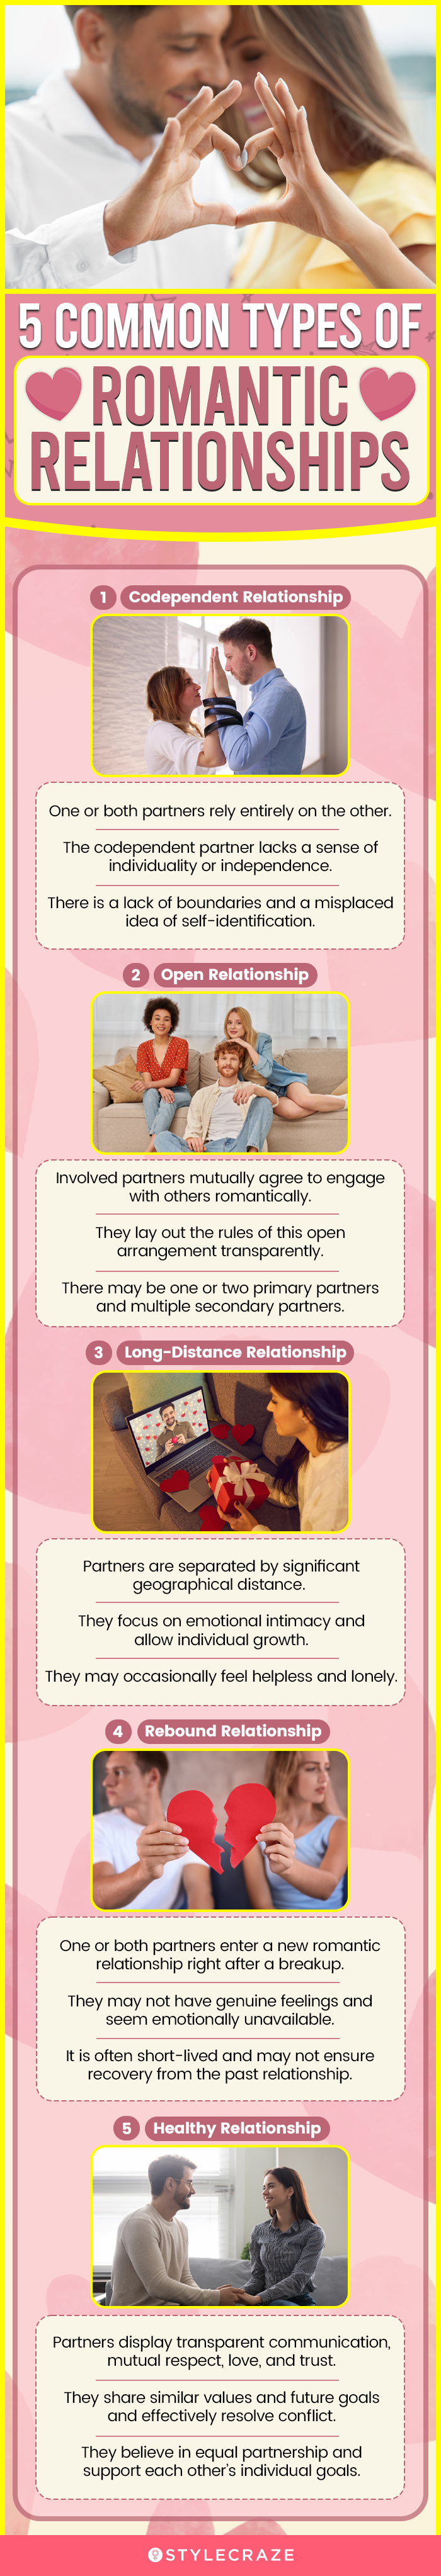 5 common types of romantic relationships (infographic)